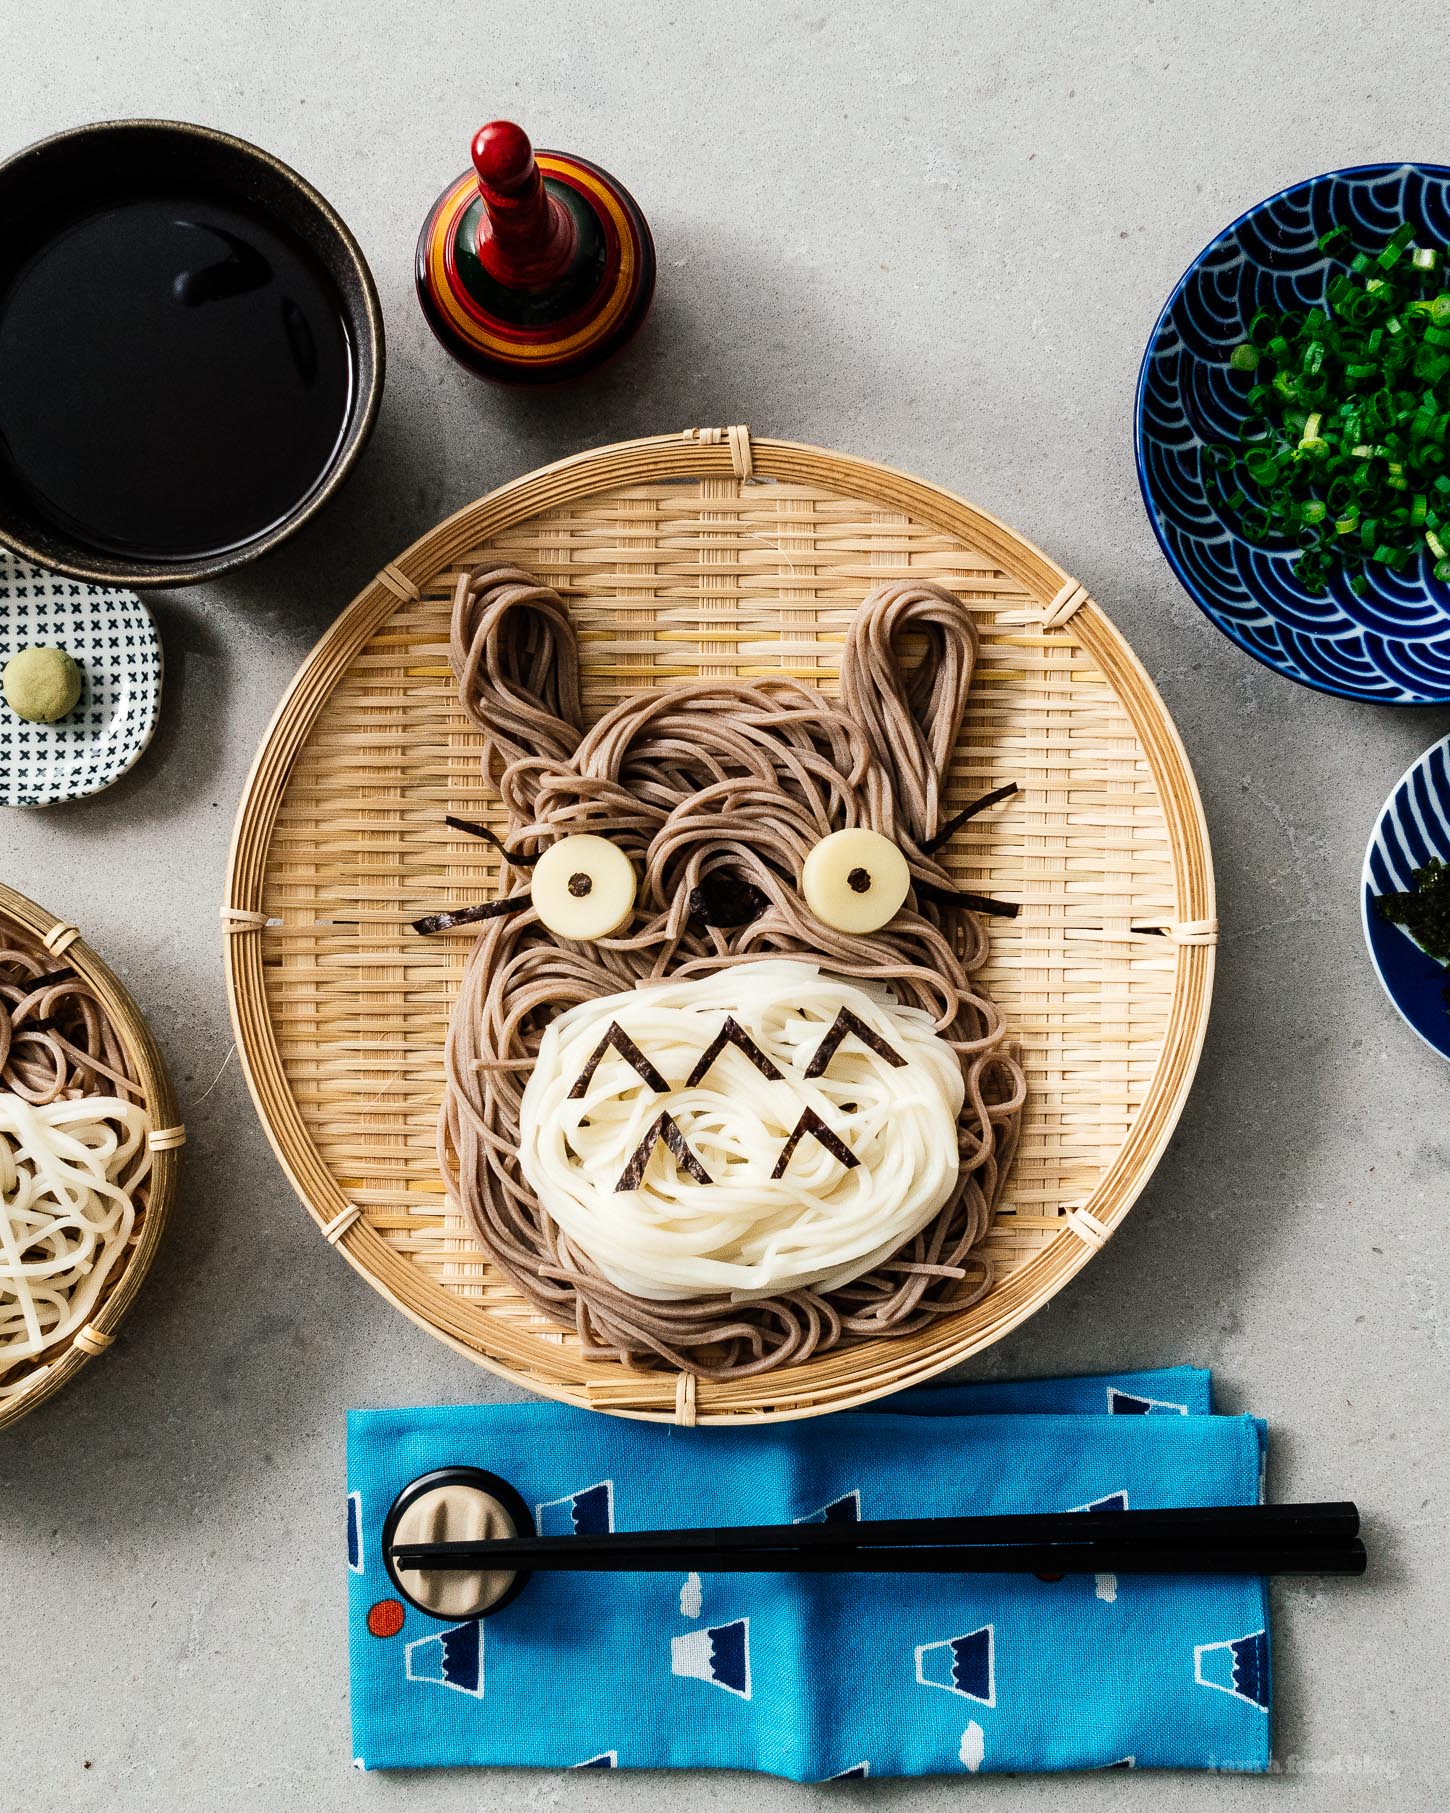 How to make Totoro soba: cold soba noodles with a soy-dashi dipping sauce in the shape of the ever lovable Totoro. You know you wanna eat him! #soba #japanesefood #totorosoba #totoro #totorofood #kawaiifood #soba #recipes